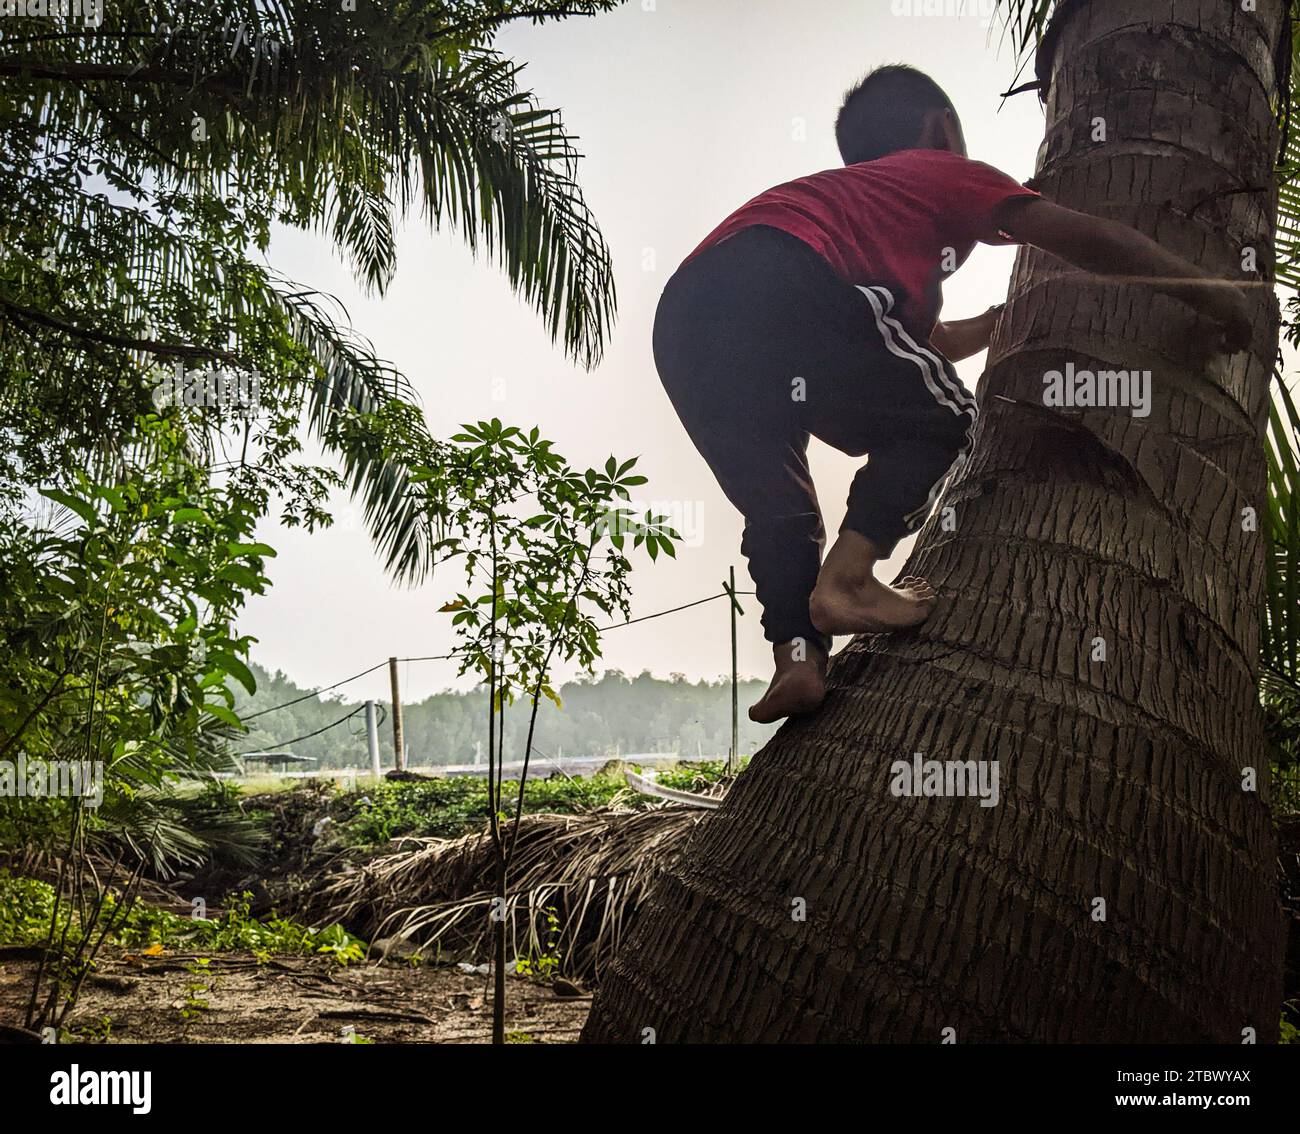 Pantai Remis, Perak 8 October 2023: A boy in a red shirt is climbing a coconut tree. Stock Photo